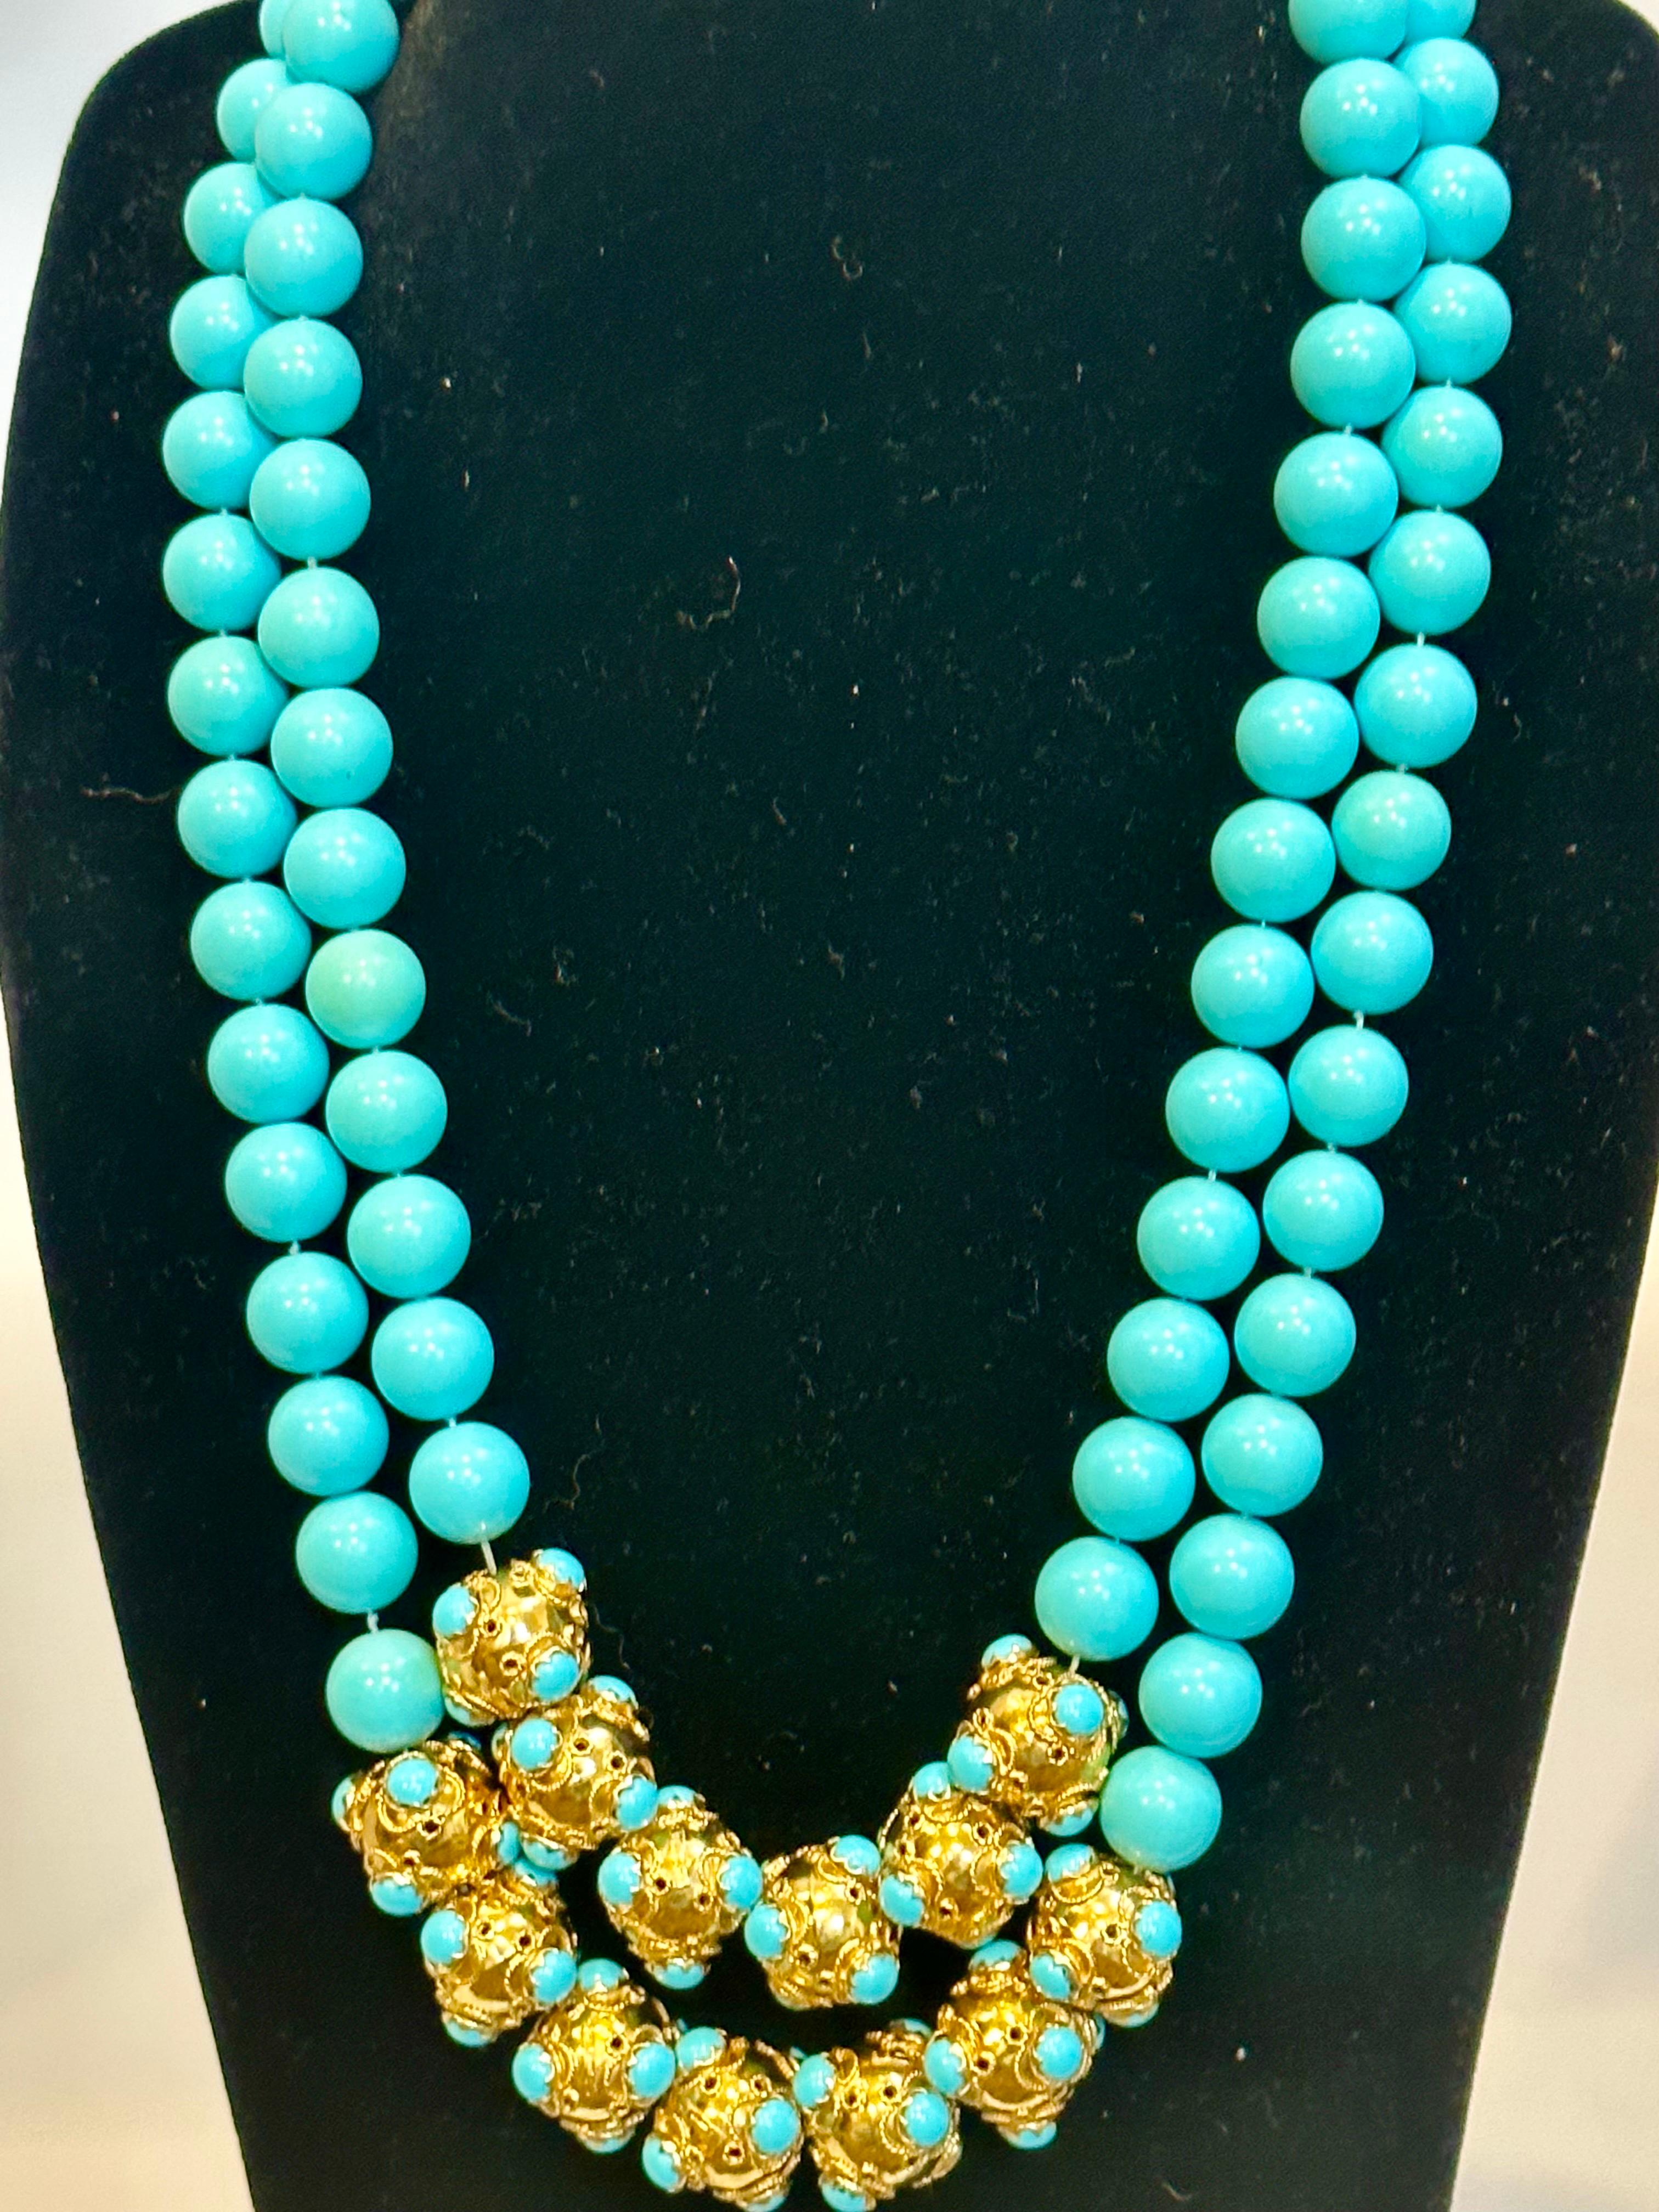 Vintage 600 Ct Natural Sleeping Beauty Turquoise Necklace, Two Strand 18 Kt Gold 5